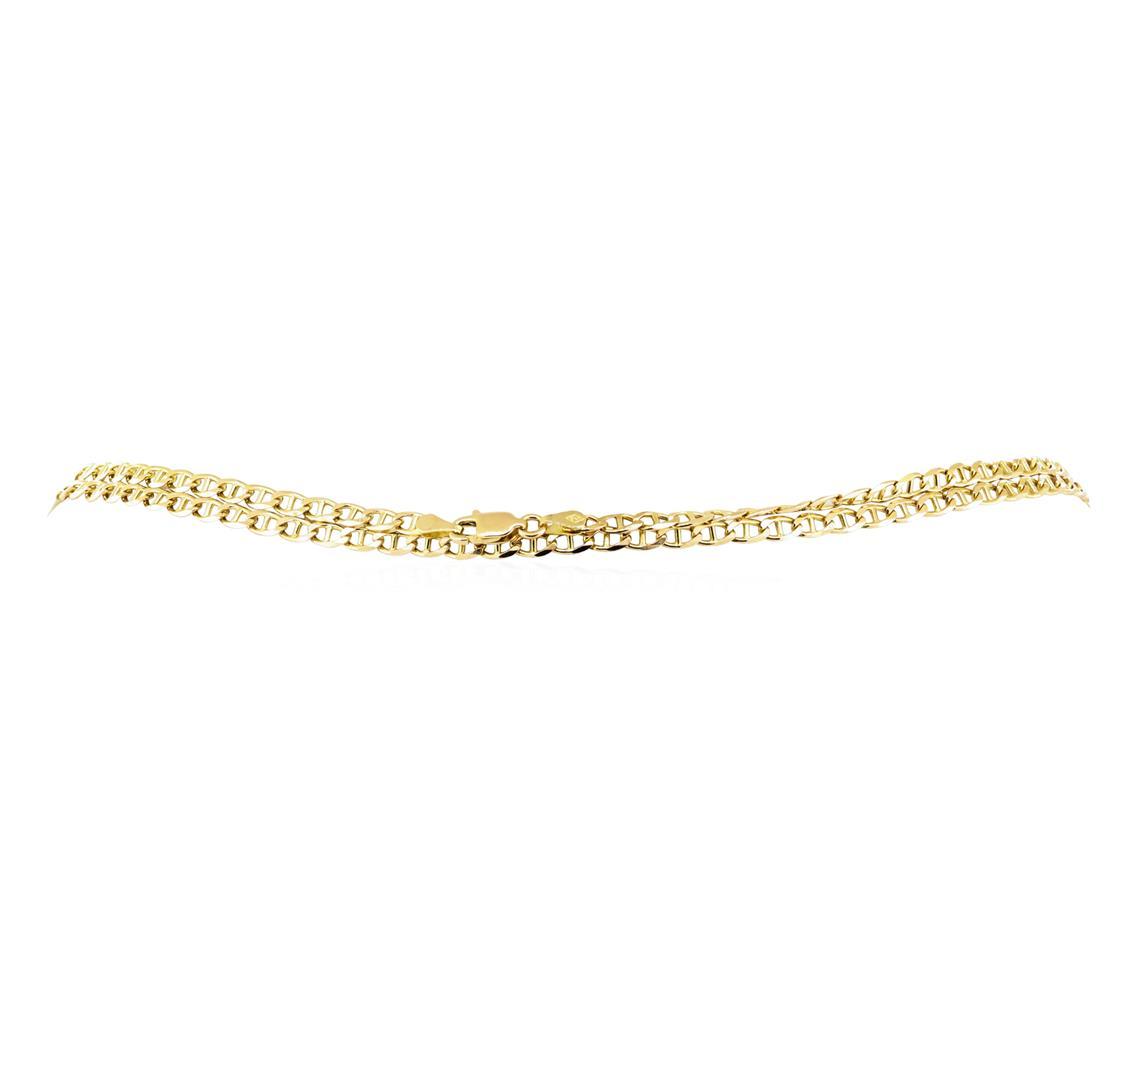 Thirty Inch Anchor Link Chain - 14KT Yellow Gold